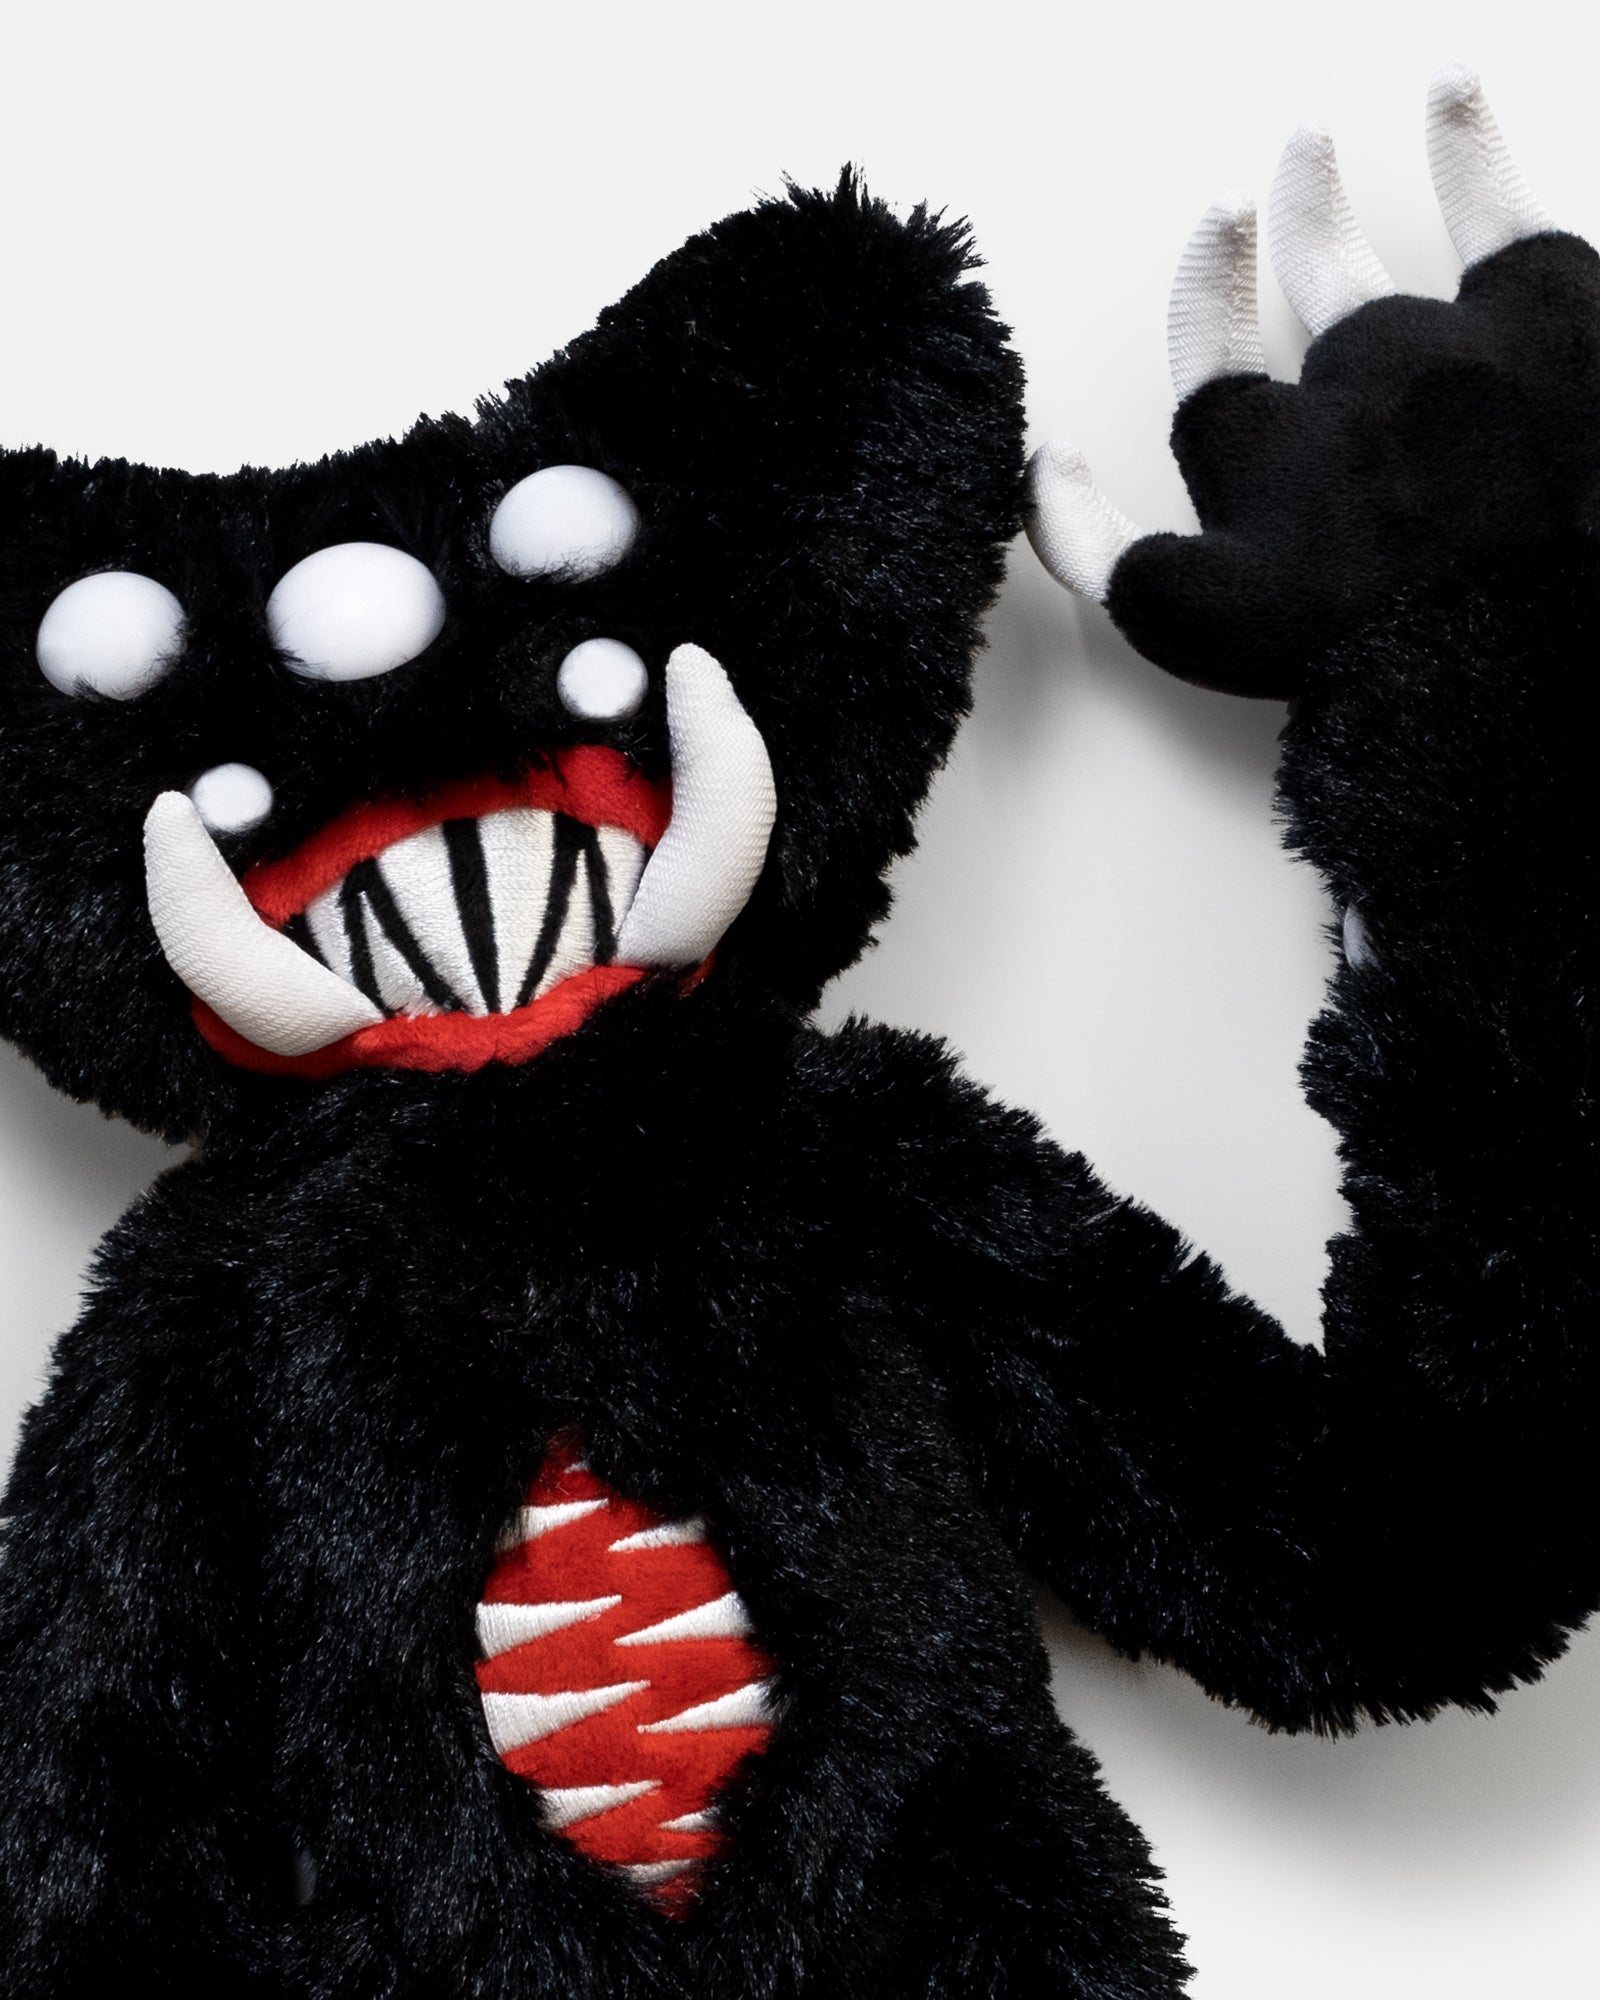 Killy Willy Plush (Pre-Order) – Poppy Playtime Official Store